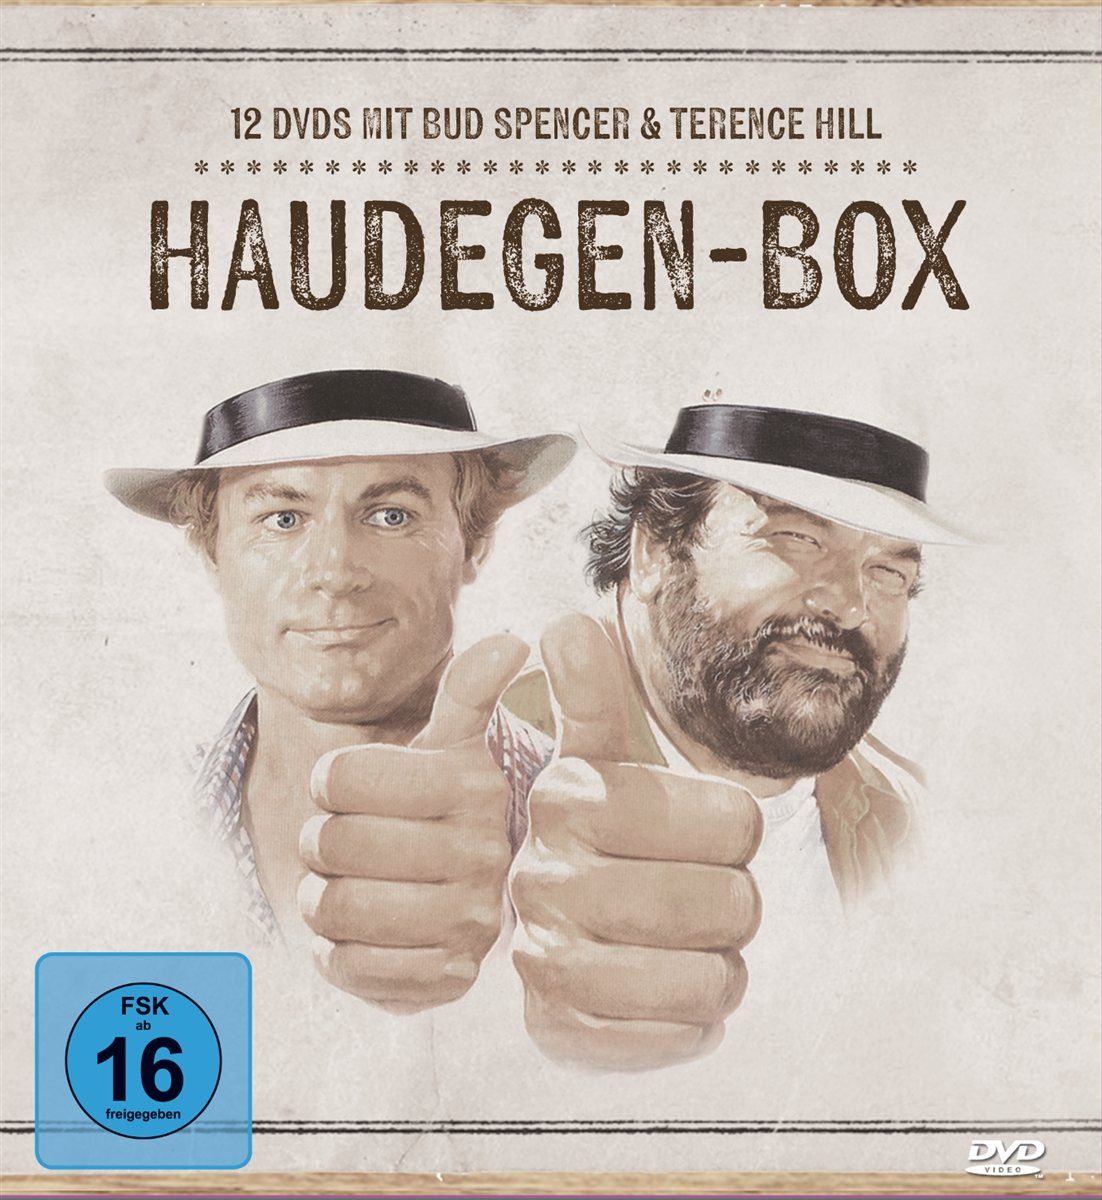 Bud Spencer & Terence Hill  Terence hill, Schauspieler